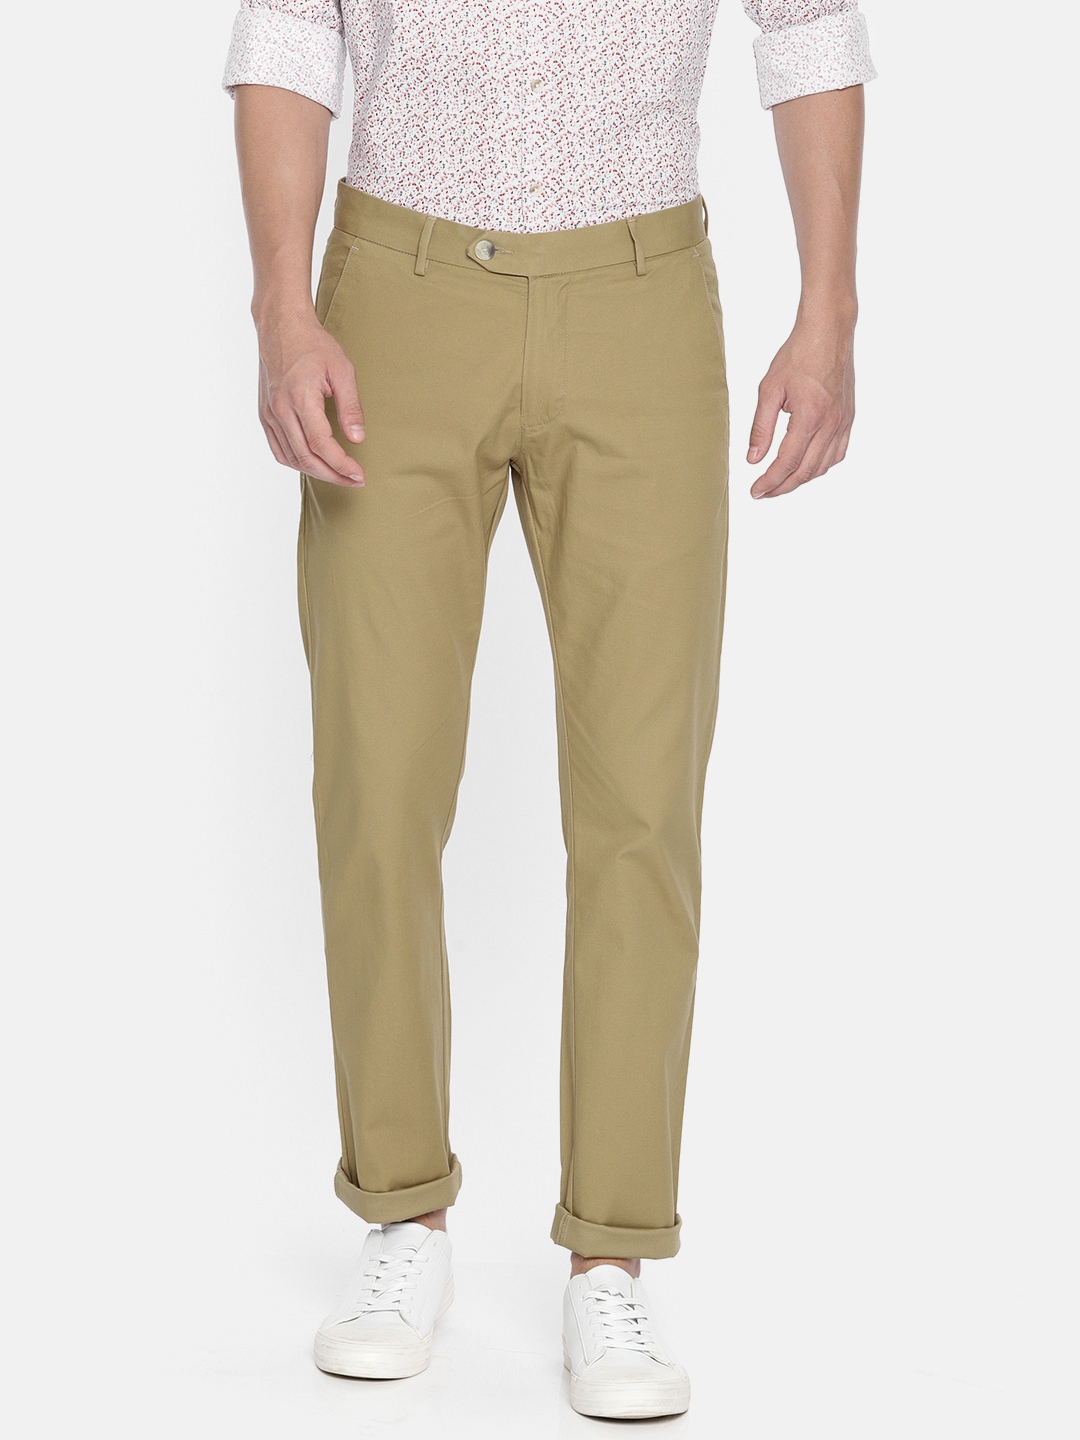 Buy Peter England Casuals Men Khaki Slim Fit Solid Chinos - Trousers ...